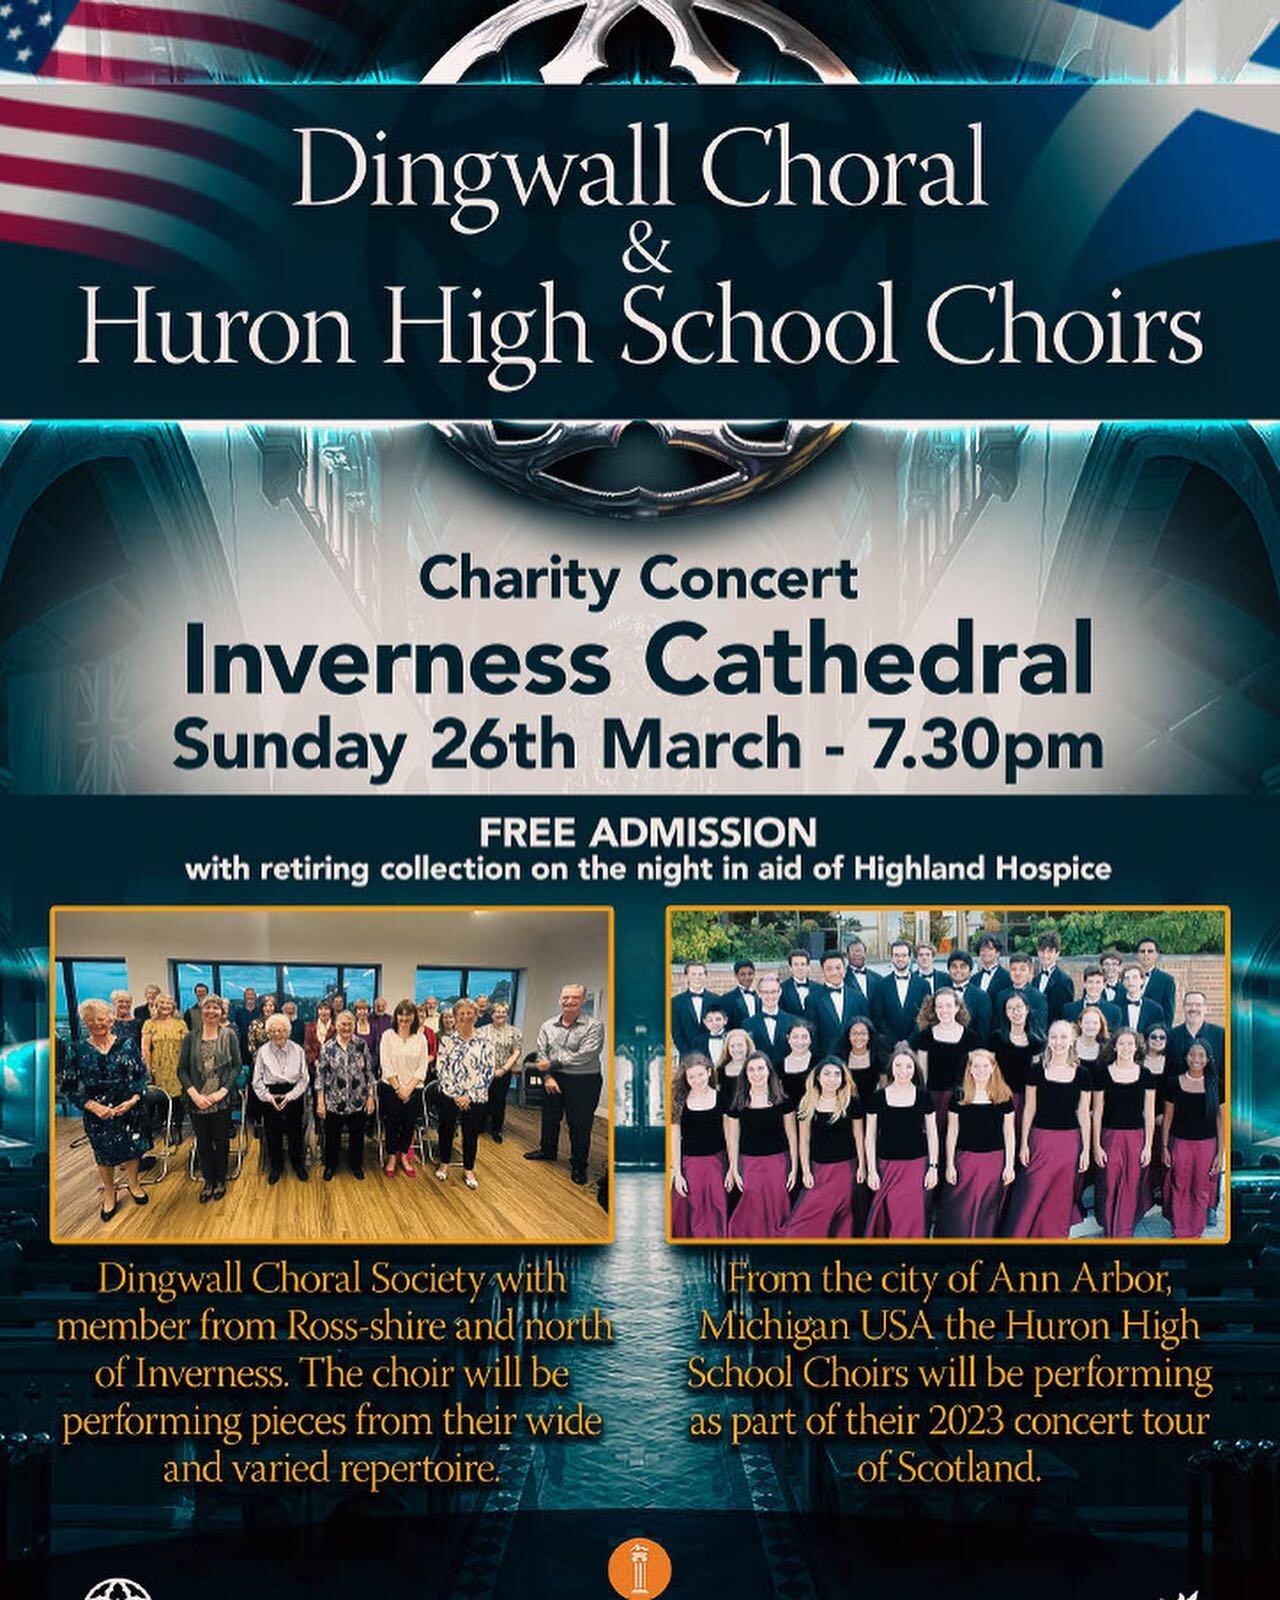 Looking forward to welcoming the Huron HS Choirs to Scotland